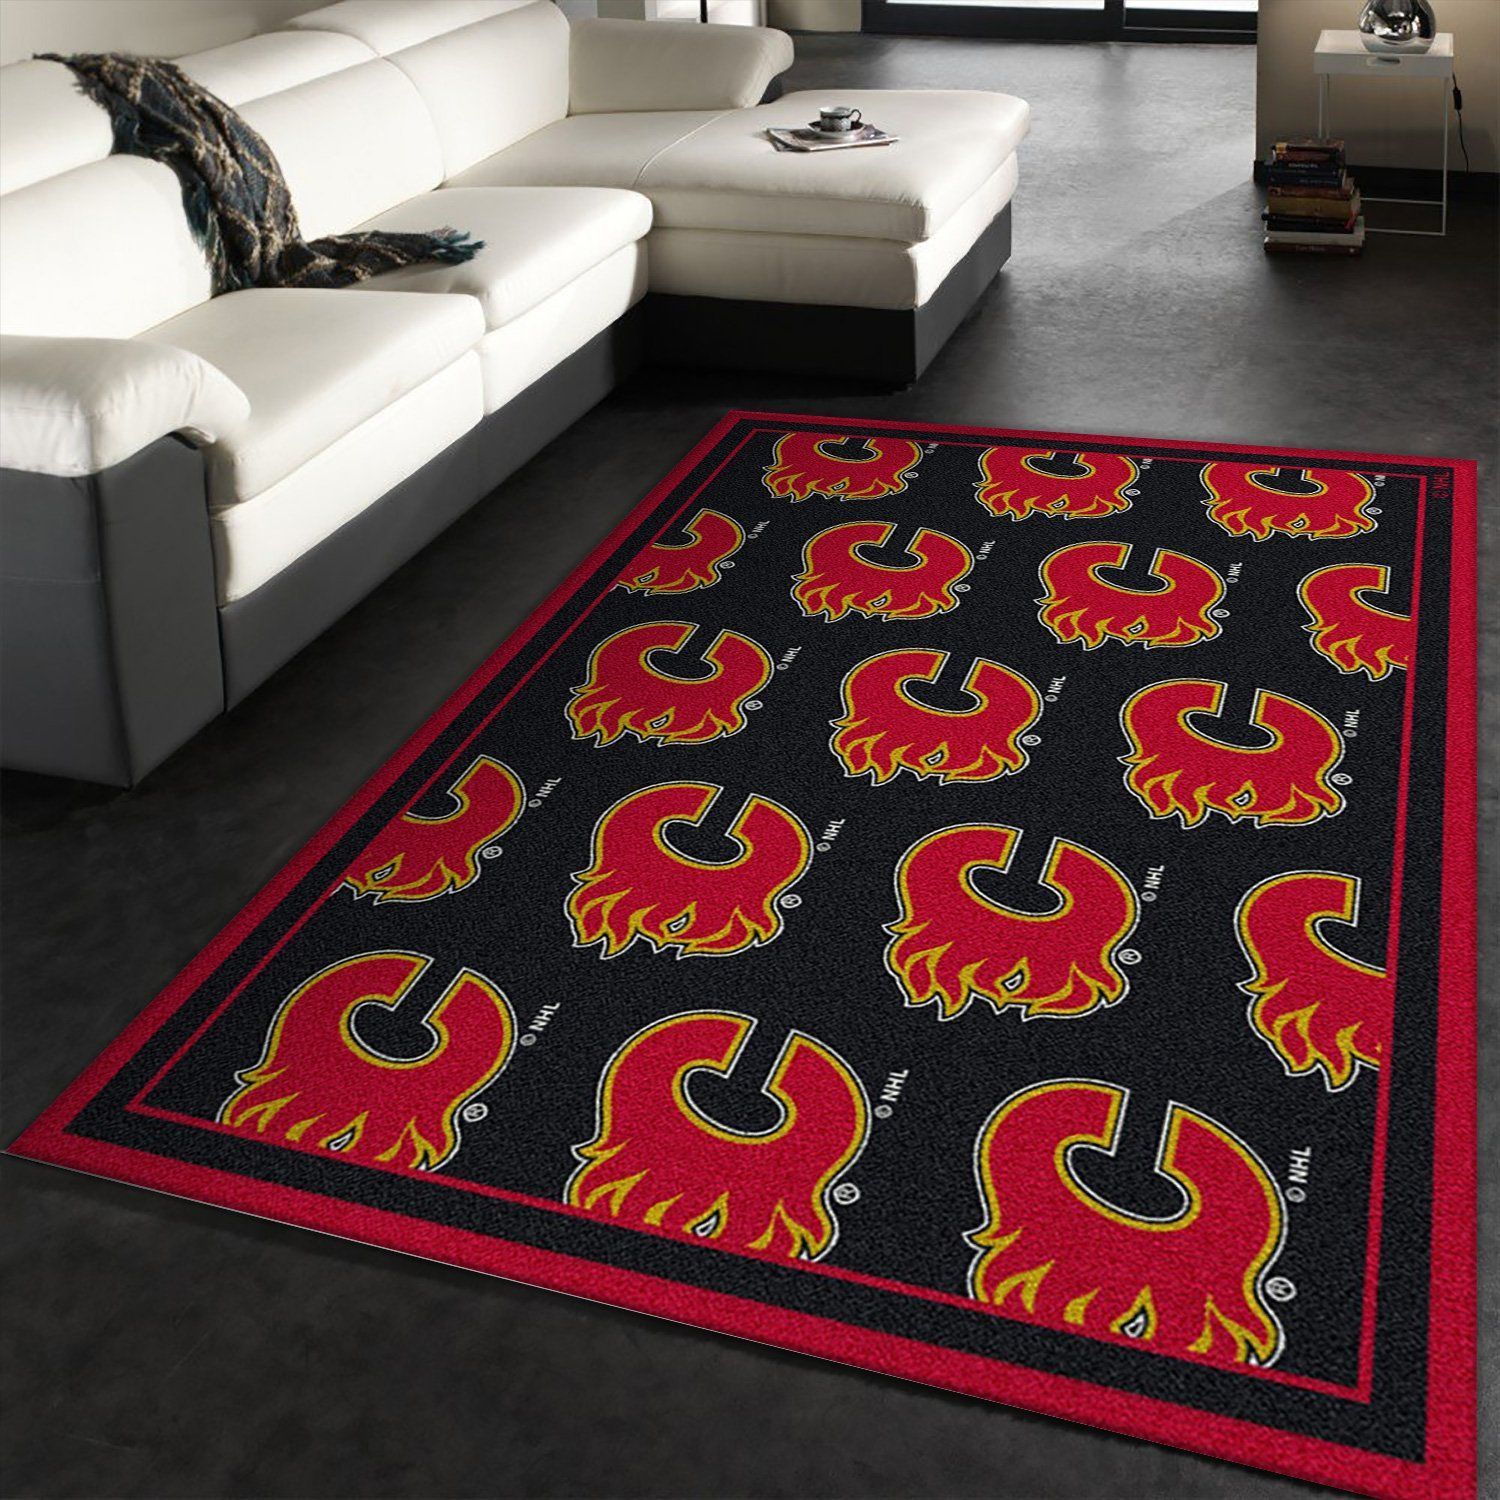 Nhl Repeat Calgary Flames Area Rug For Christmas, Kitchen Rug, Home US Decor - Indoor Outdoor Rugs